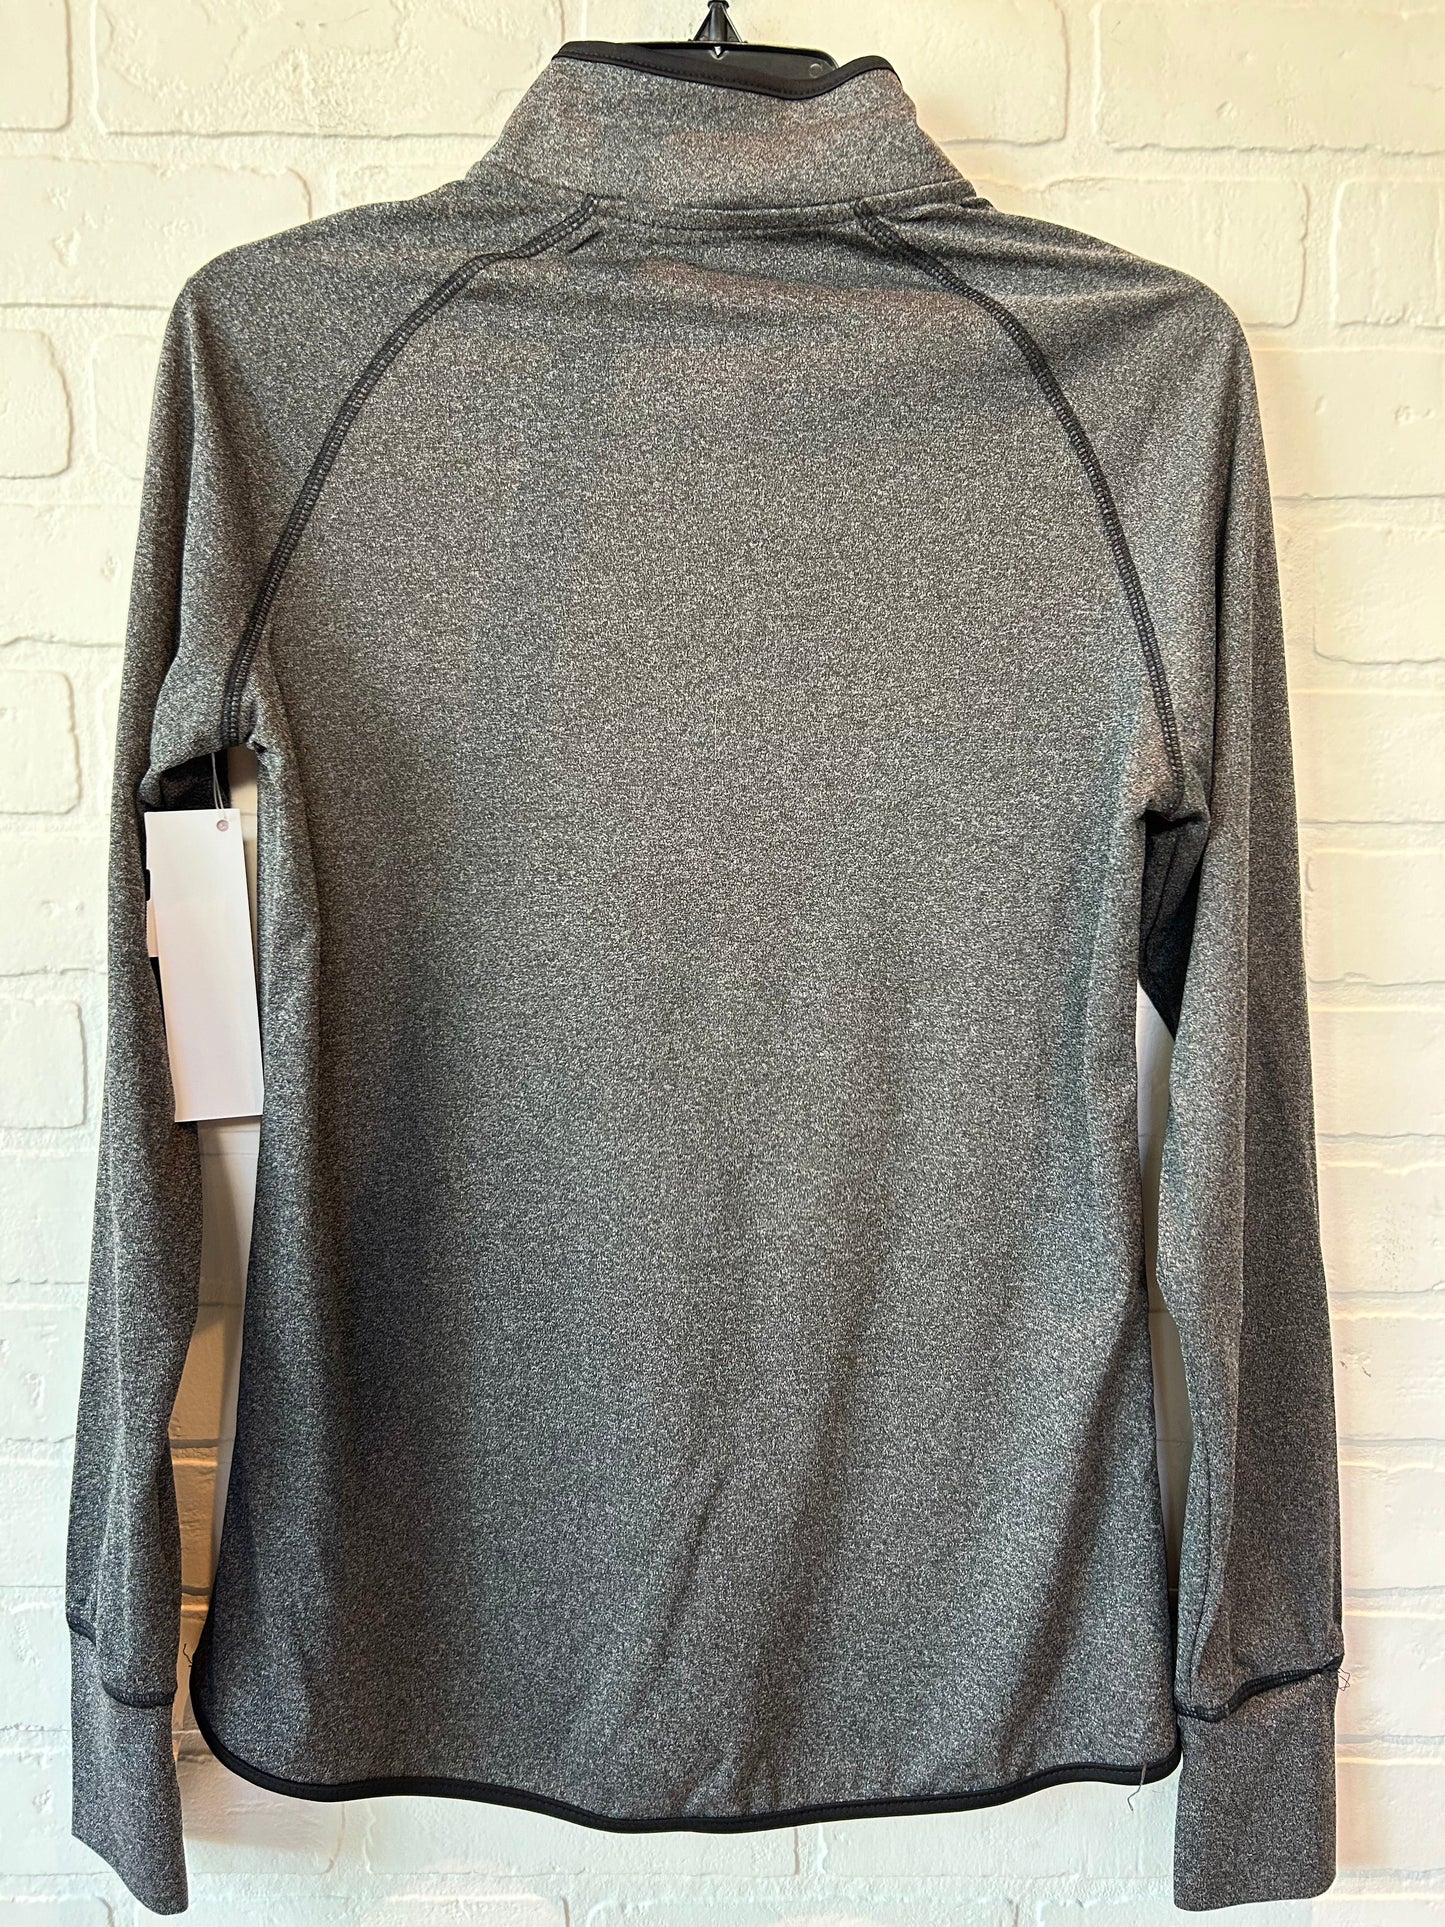 Grey Athletic Top Long Sleeve Crewneck Colosseum, Size M